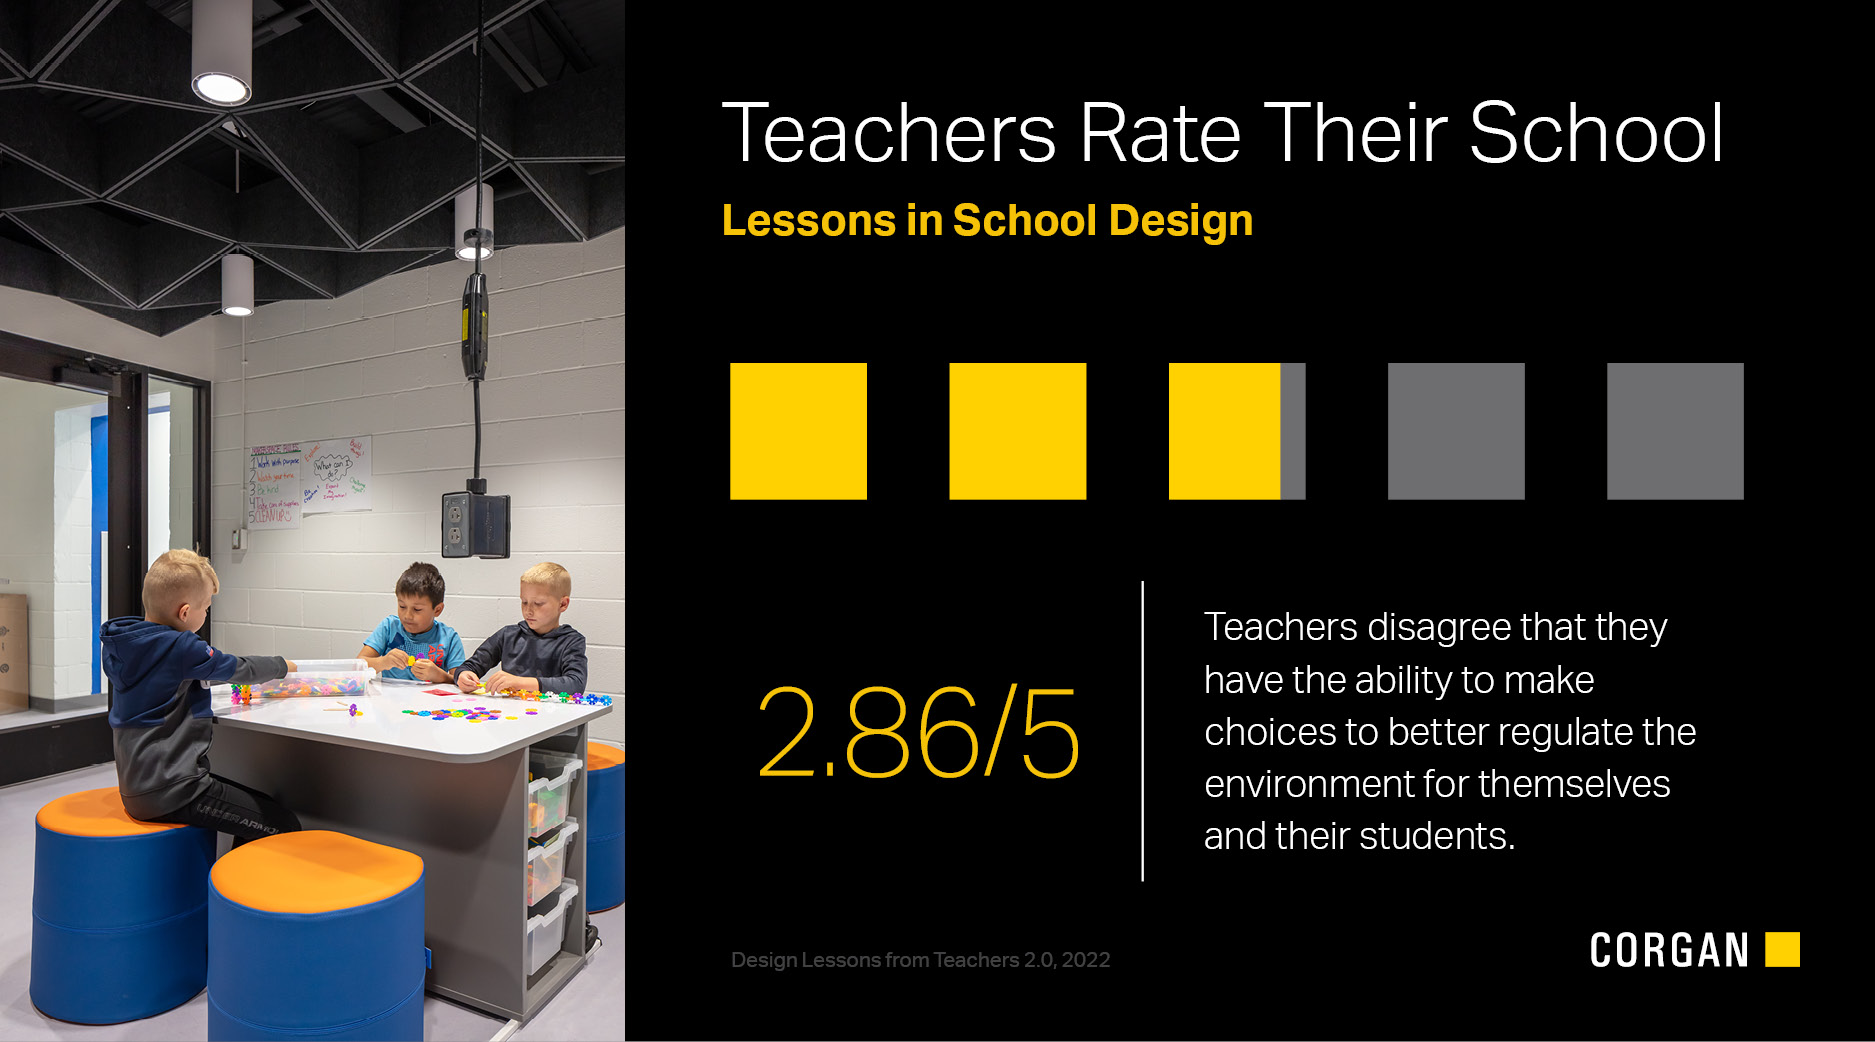 Design Lessons From Teachers 2.0 - Retuning the Classroom 4